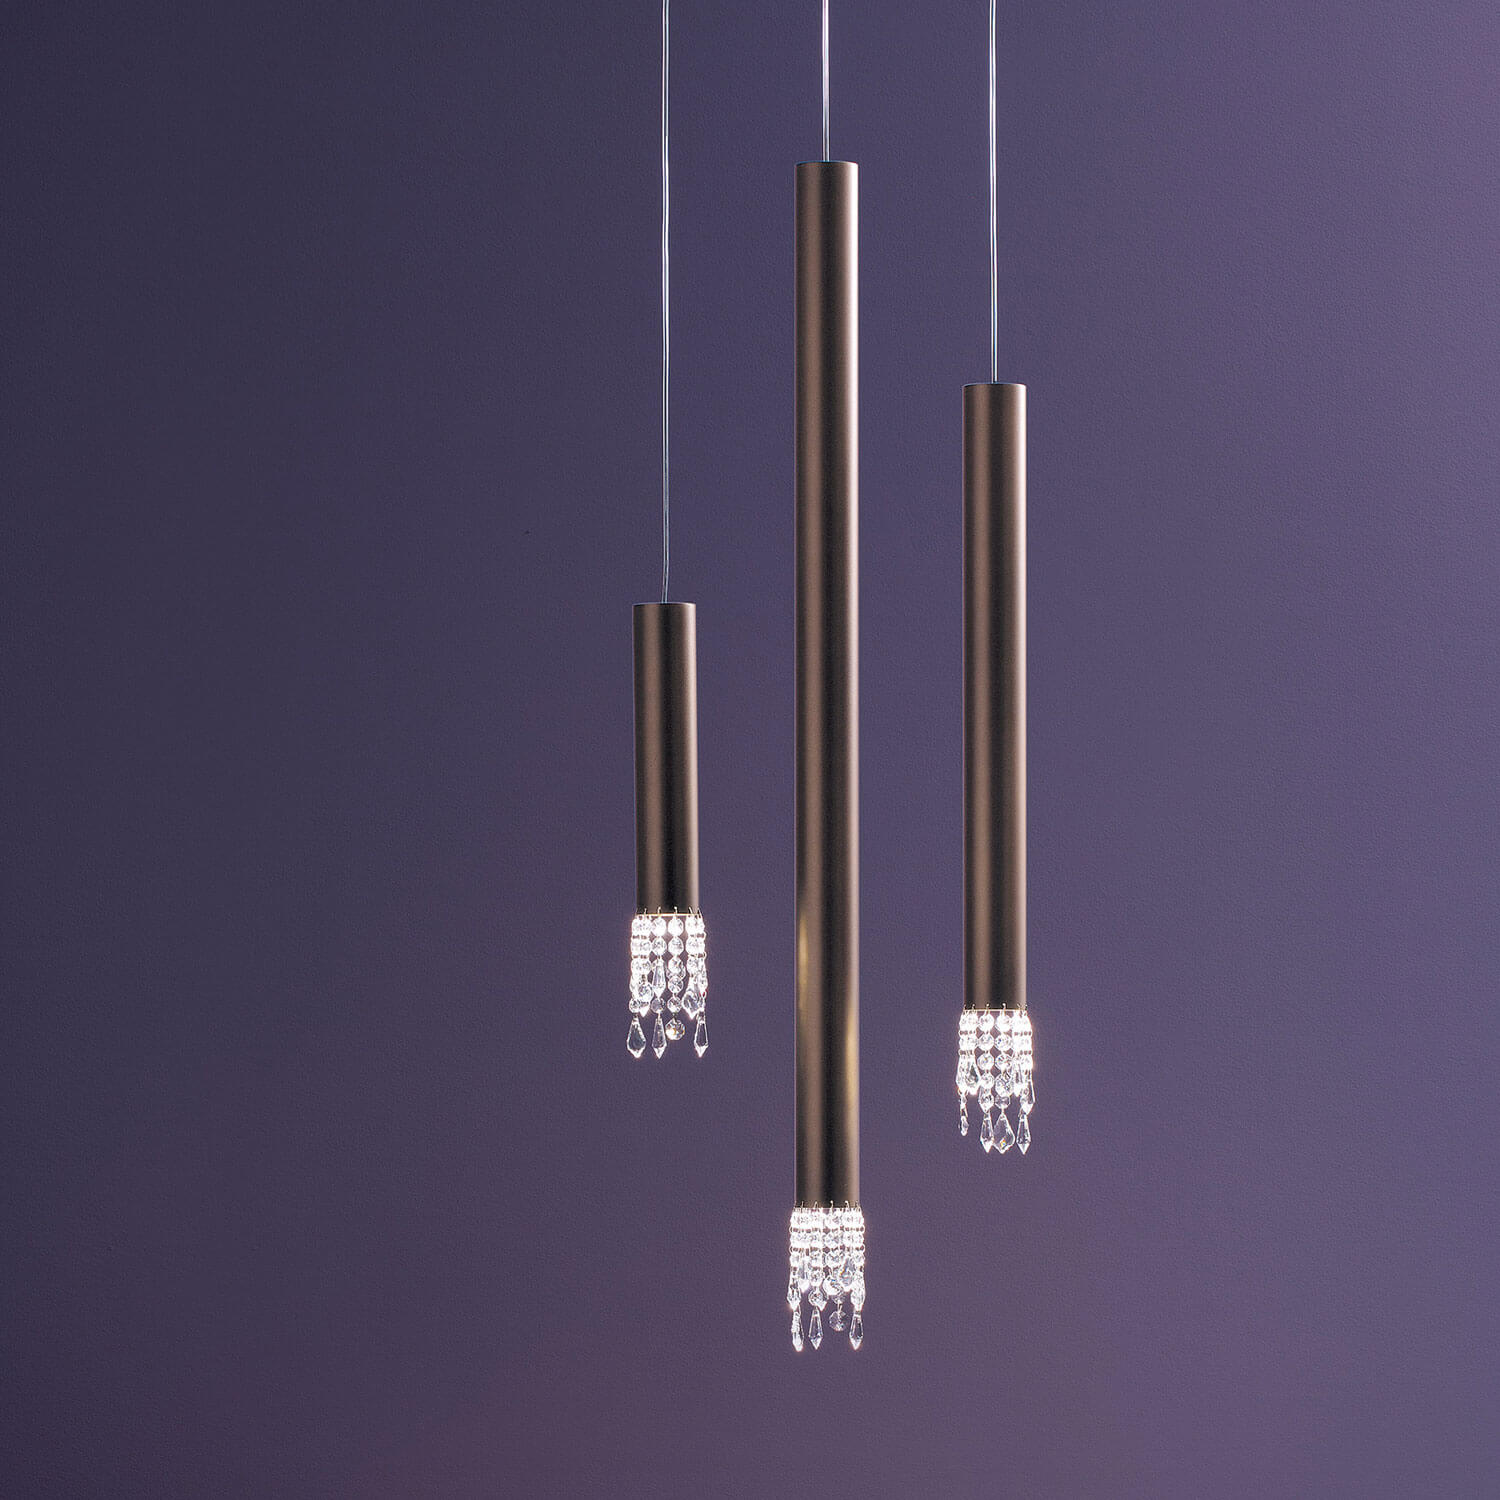 Eclisse Tube pendant lamp by Light4